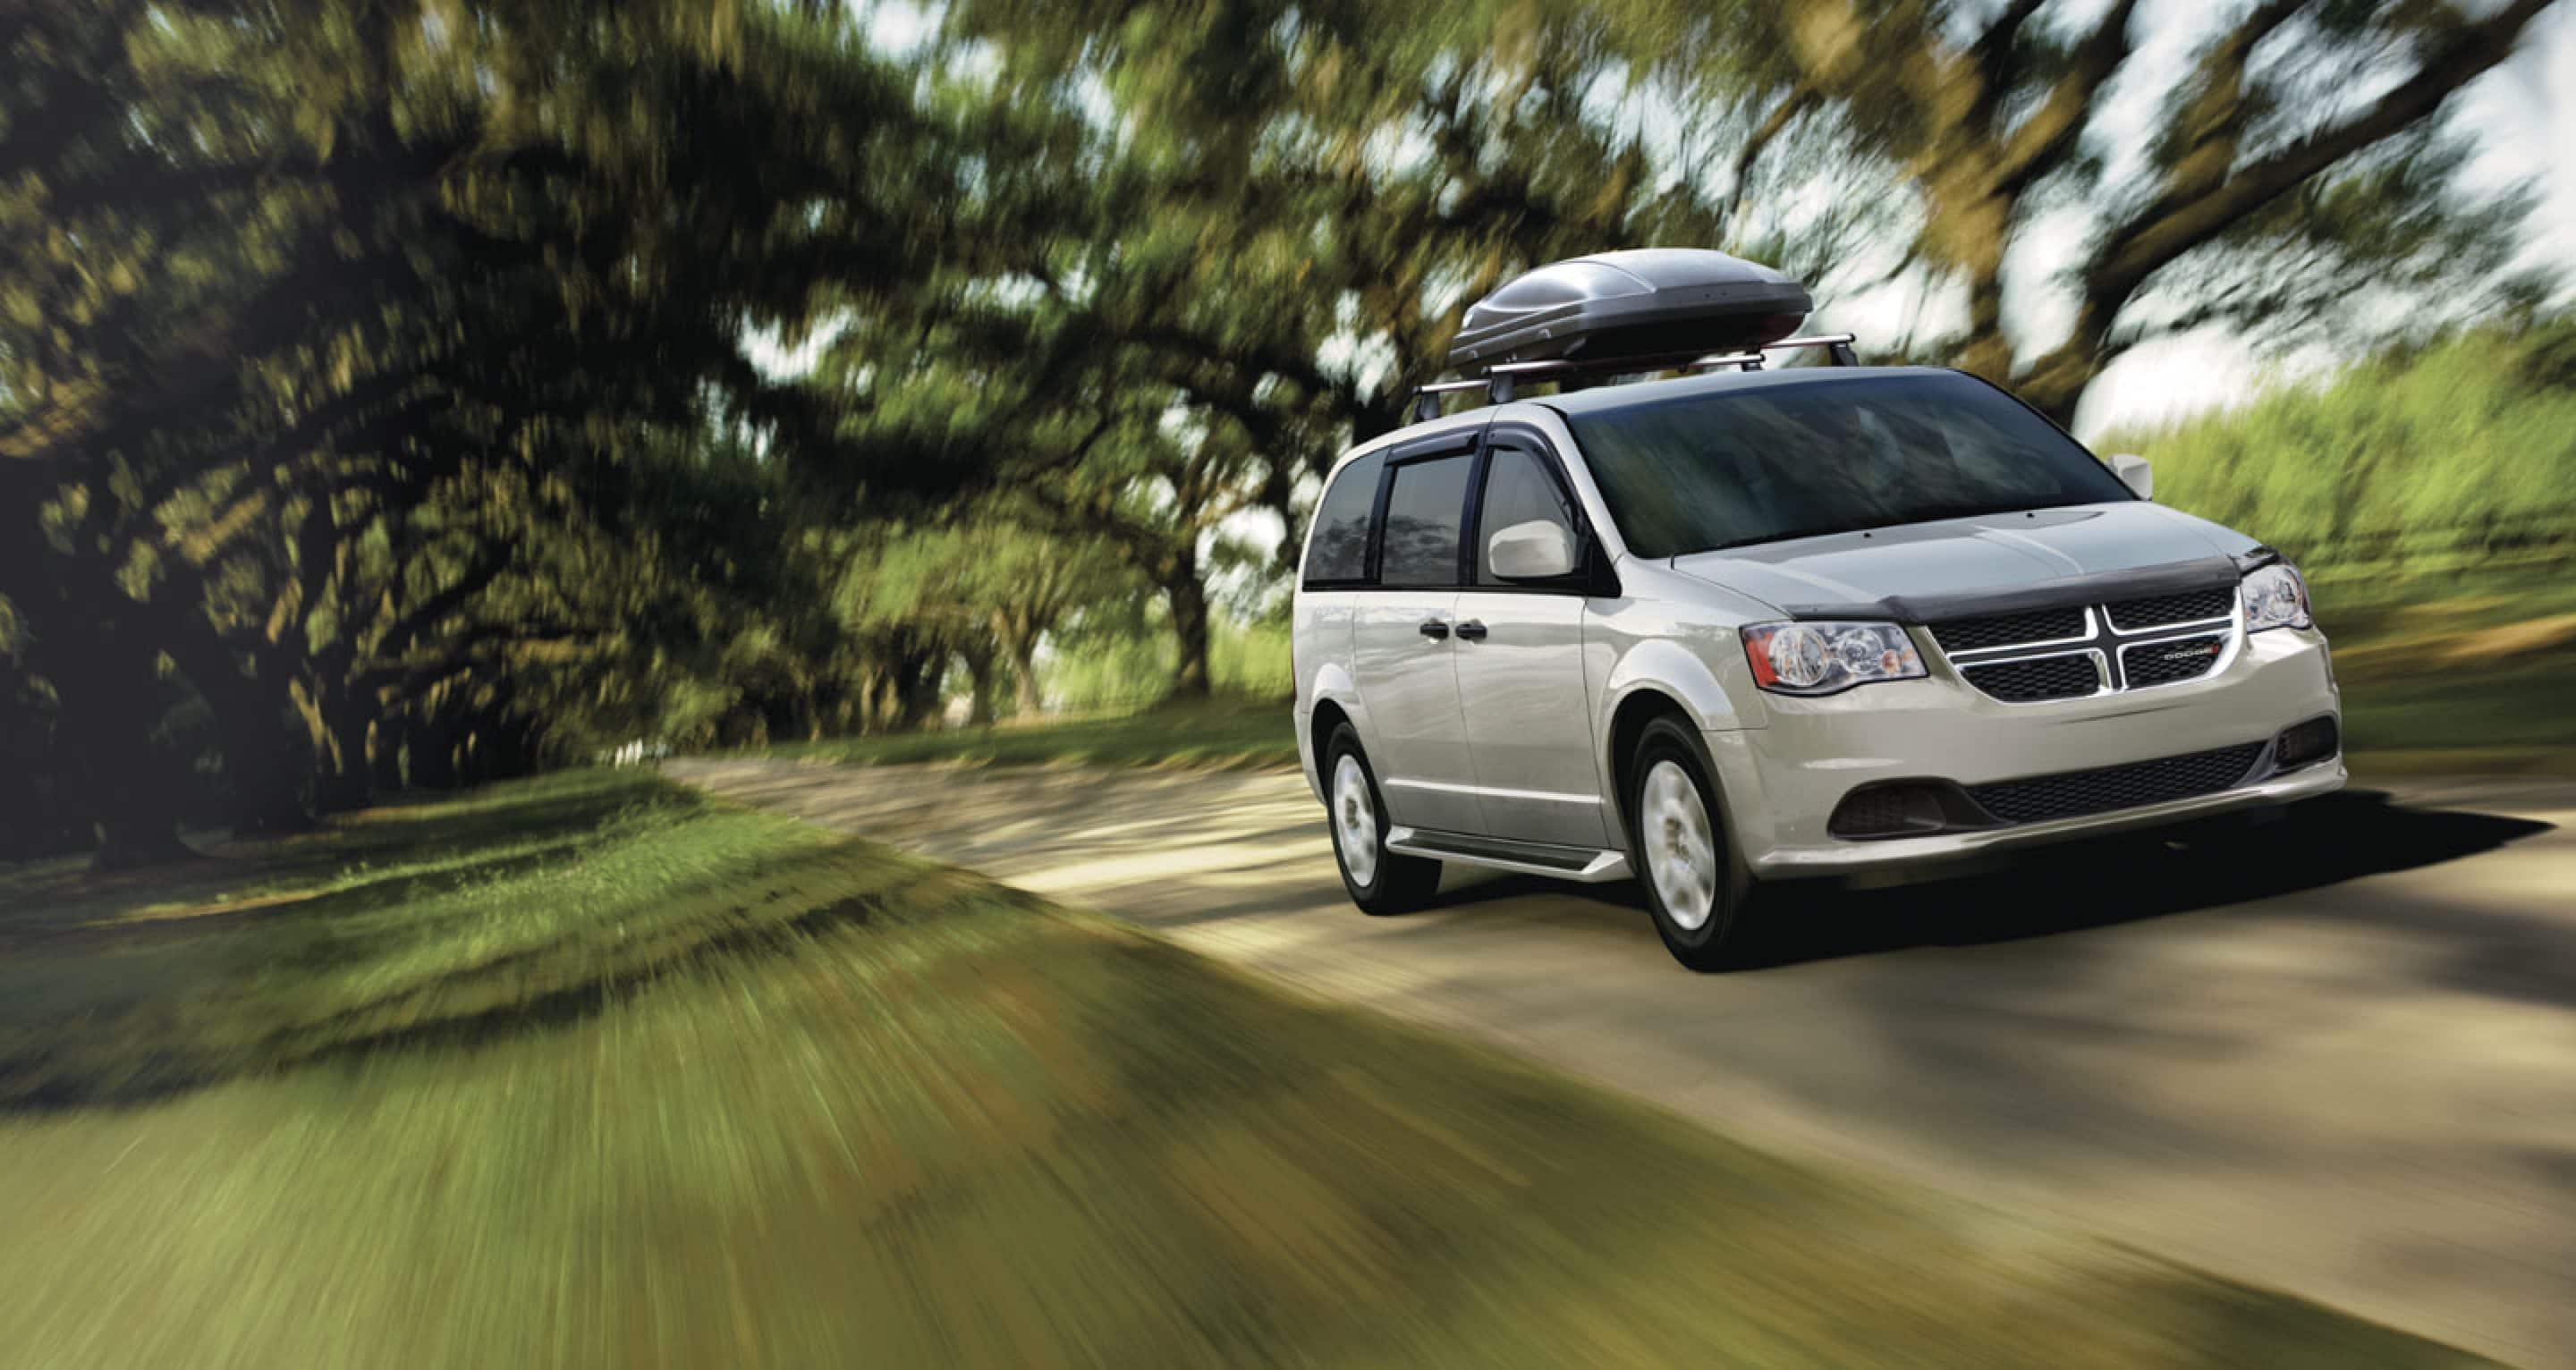 Top Used Minivans for Bad Credit Buyers at <b>Loan Approval Center</b>